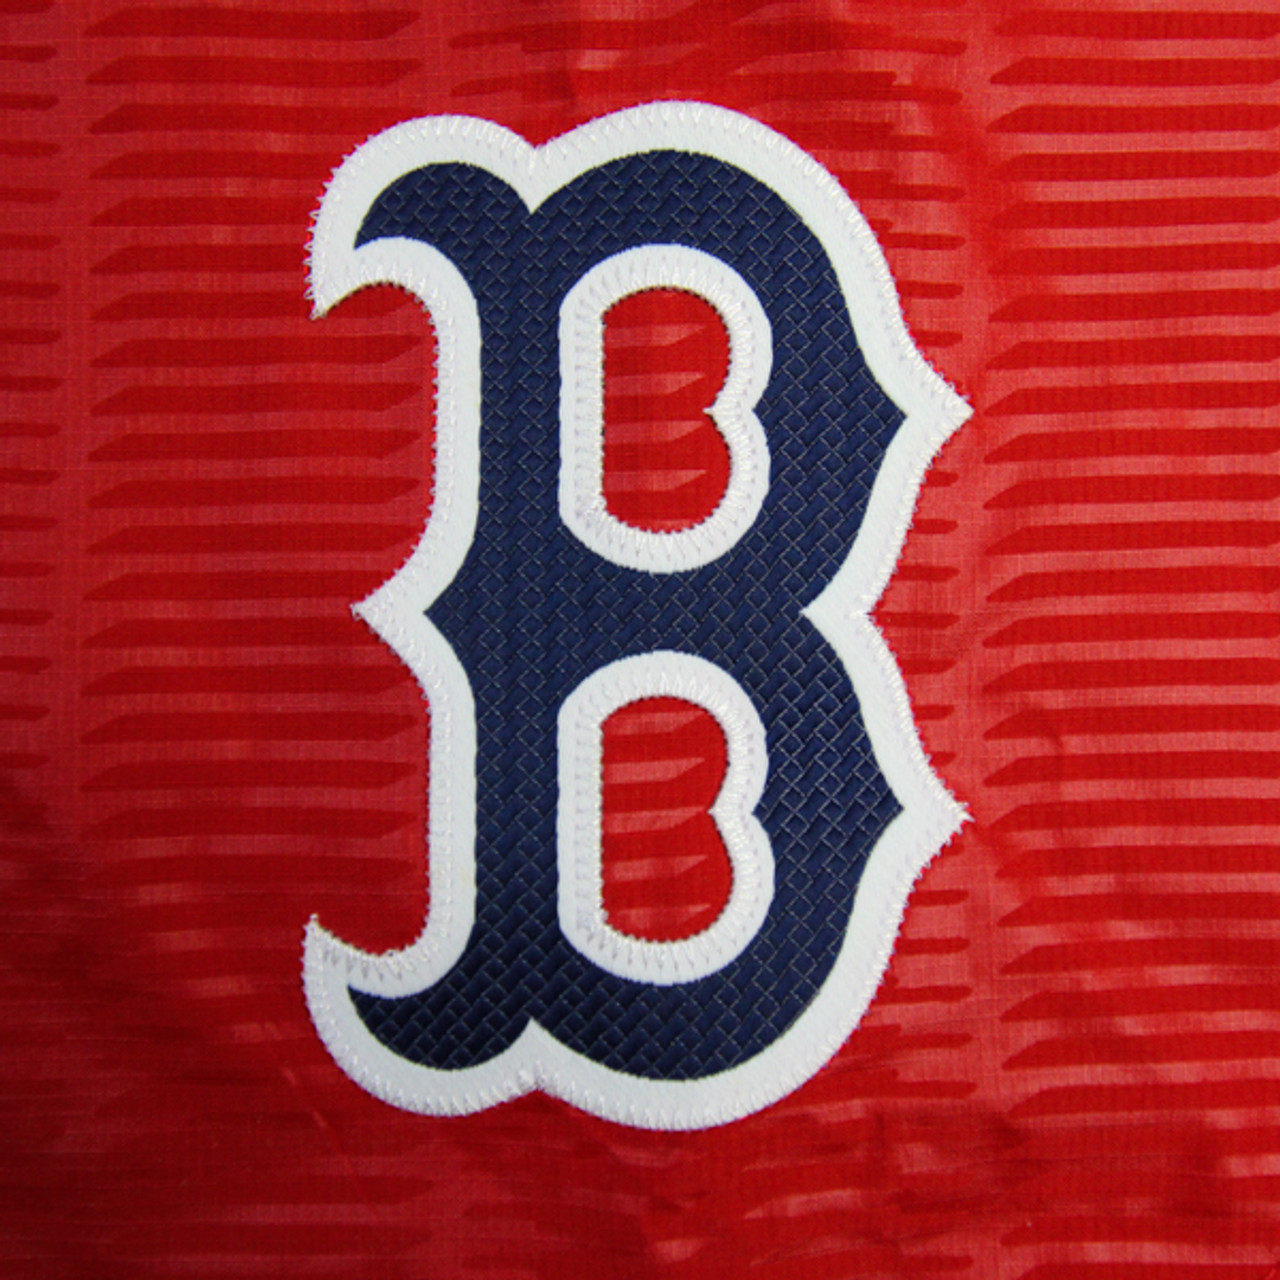 Boston Red Sox Apparel | Clothing and Gear for Boston Red Sox Fans